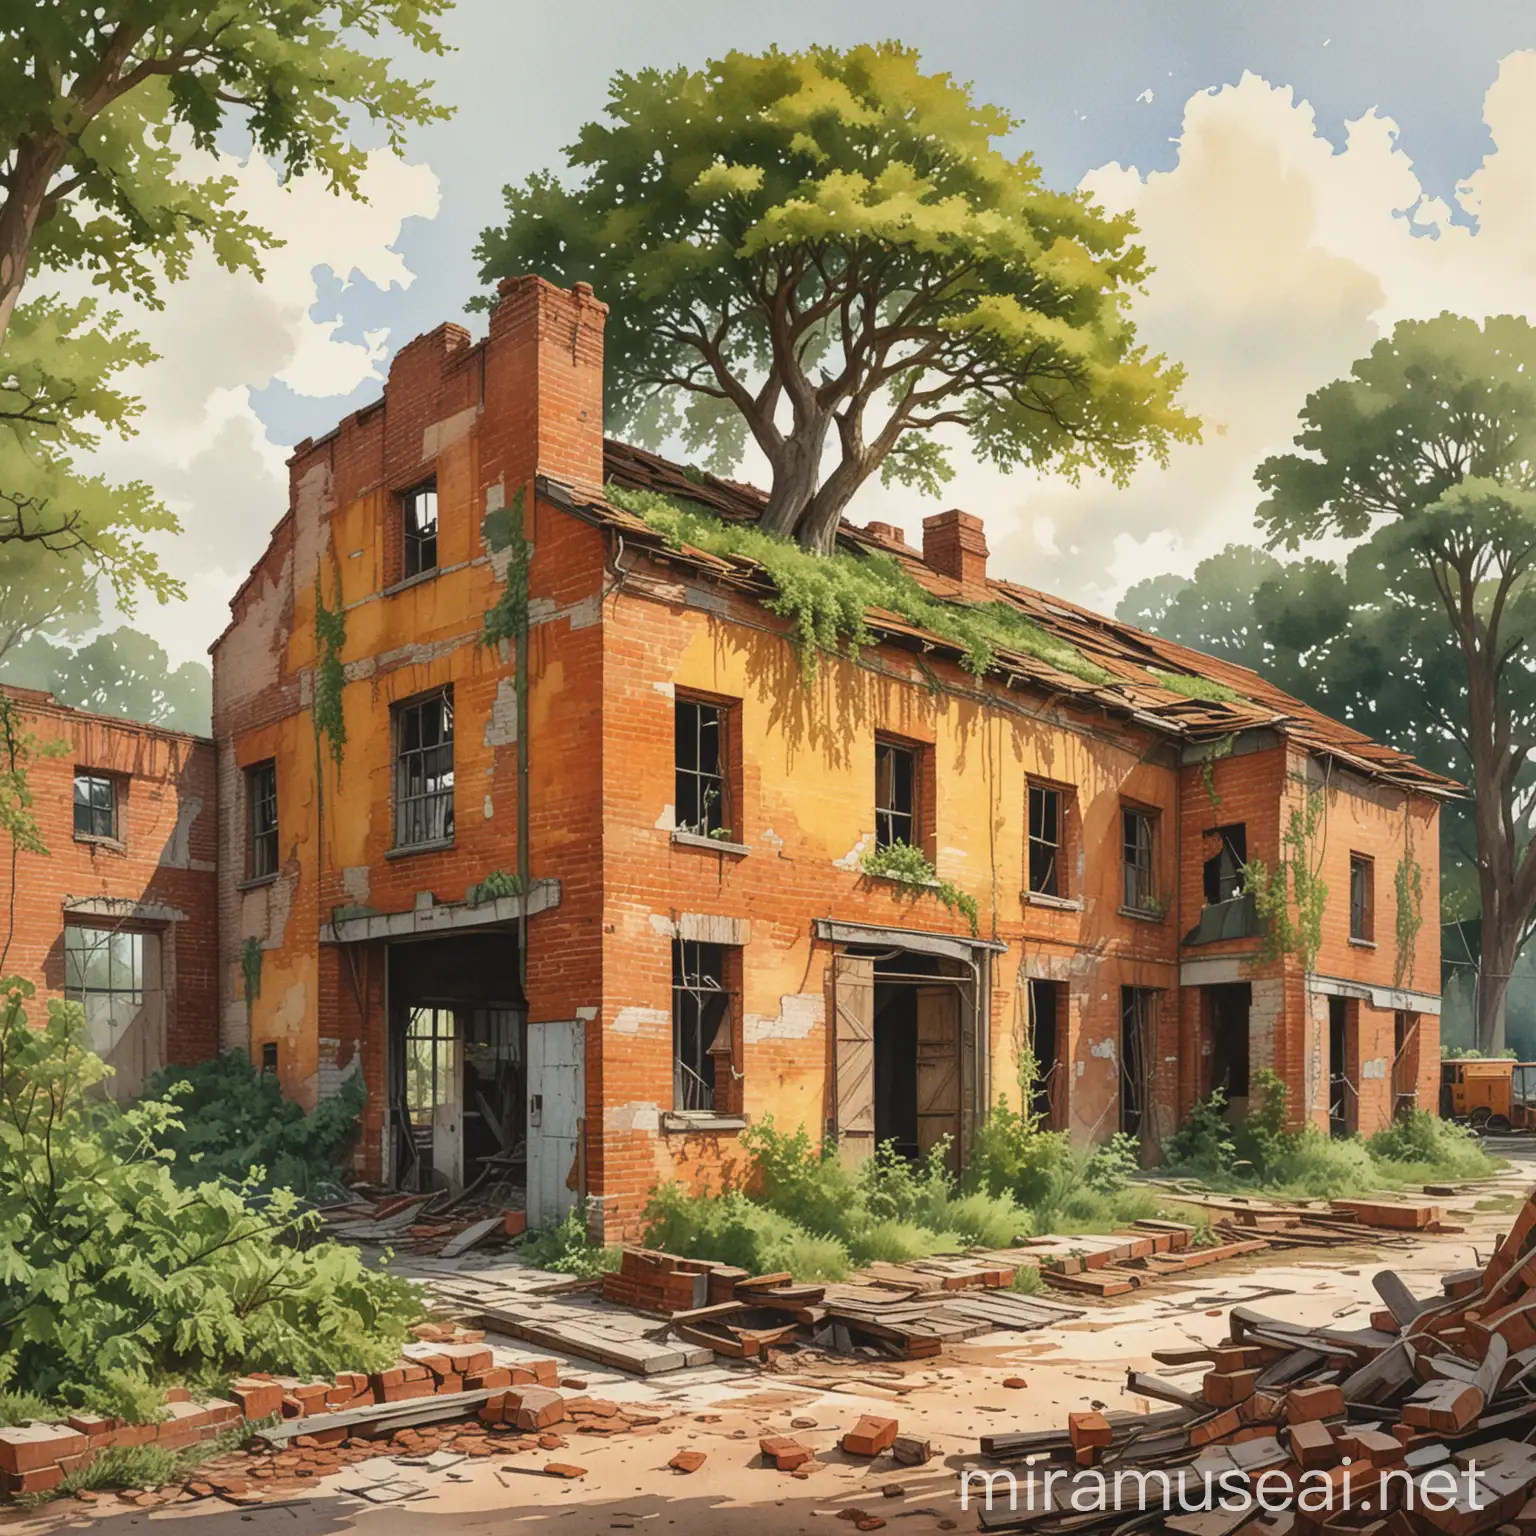 Watercolor Painting of Abandoned Factory with Pax Fabrica Sign